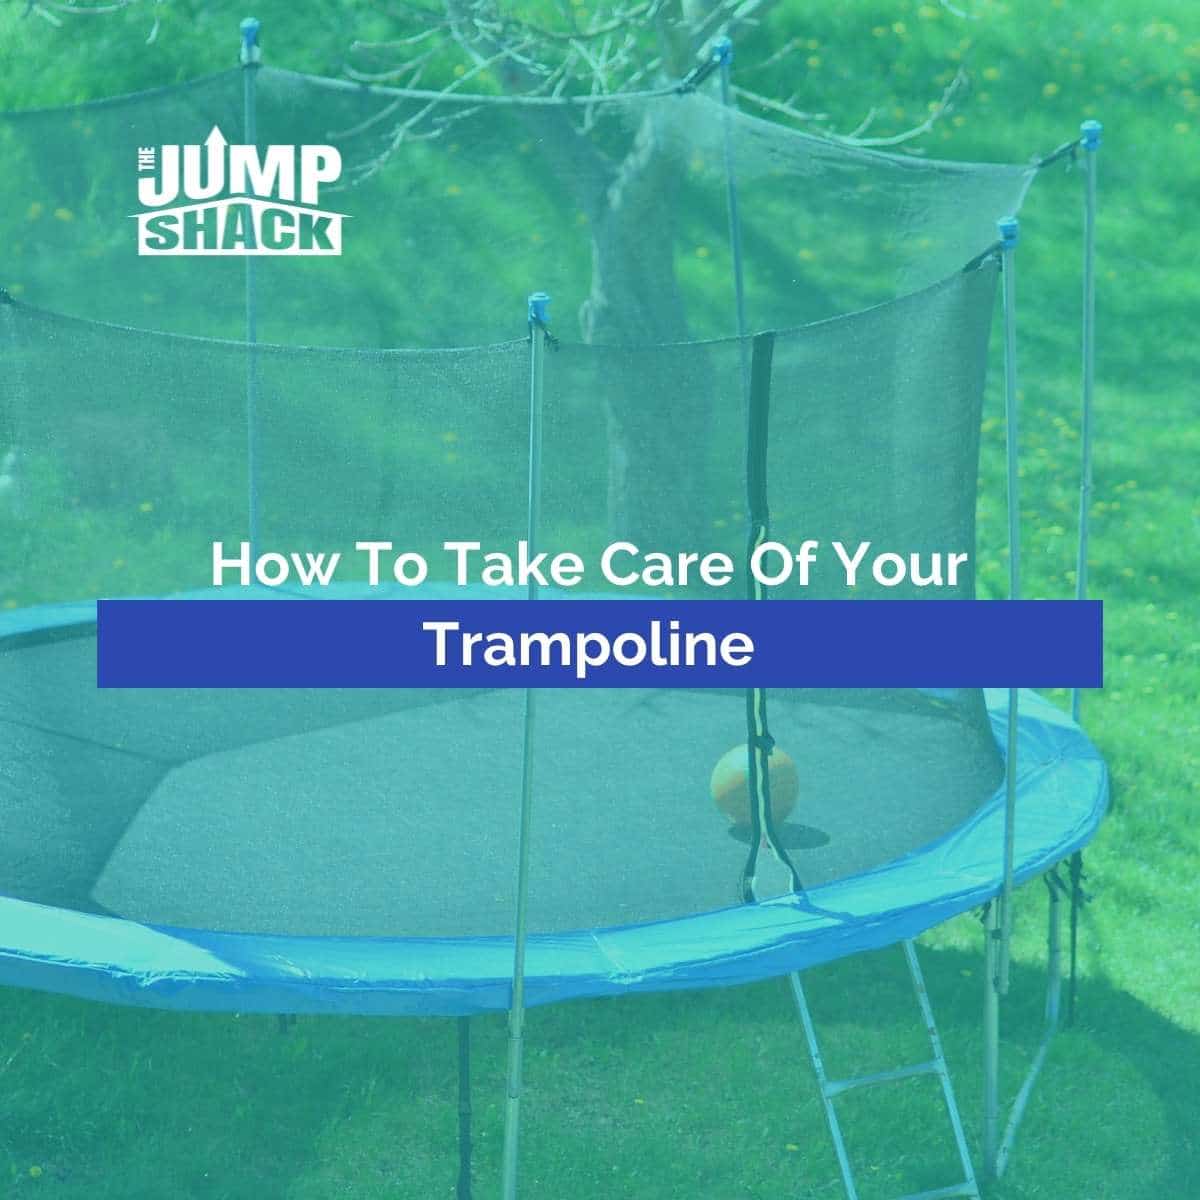 How To Take Care Of Your Trampoline